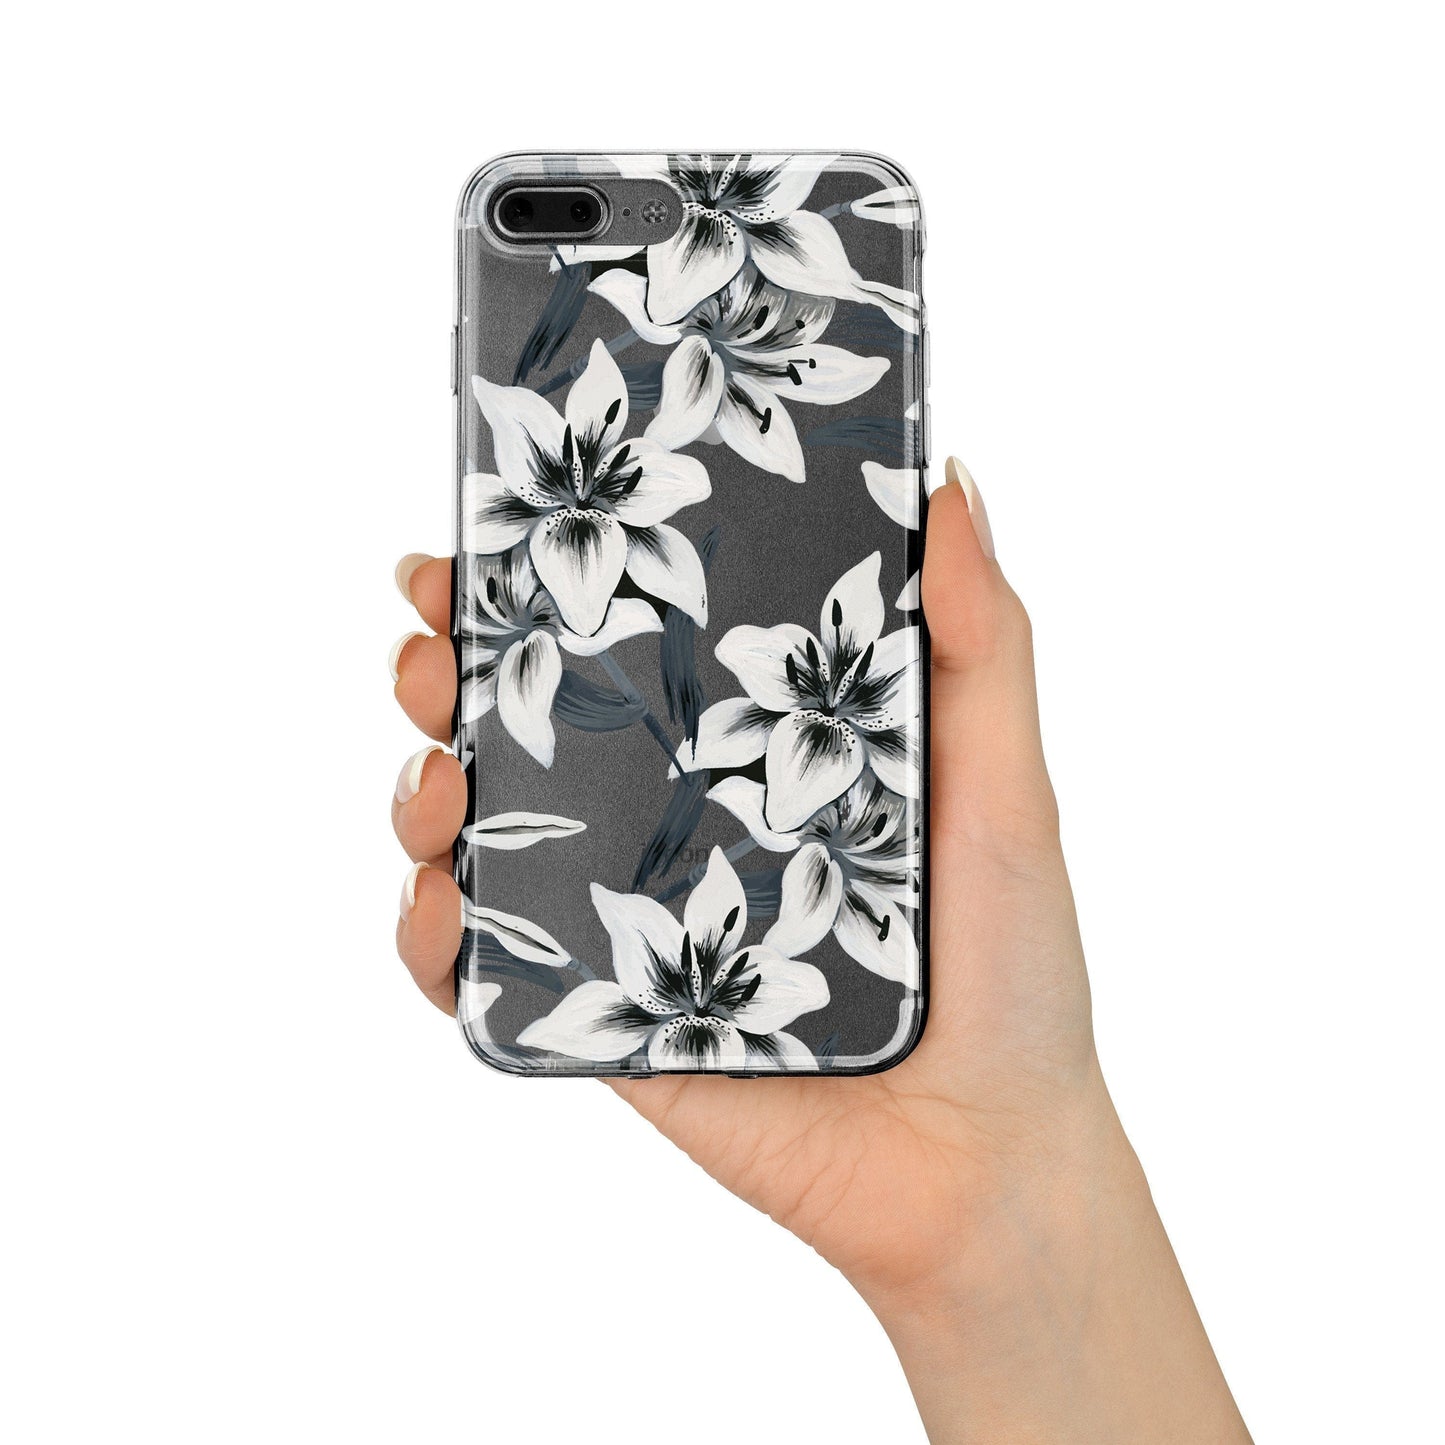 Watercolor Lilies - Clear TPU Case Cover Consumer Electronics by milkyway cases | BlingxAddict